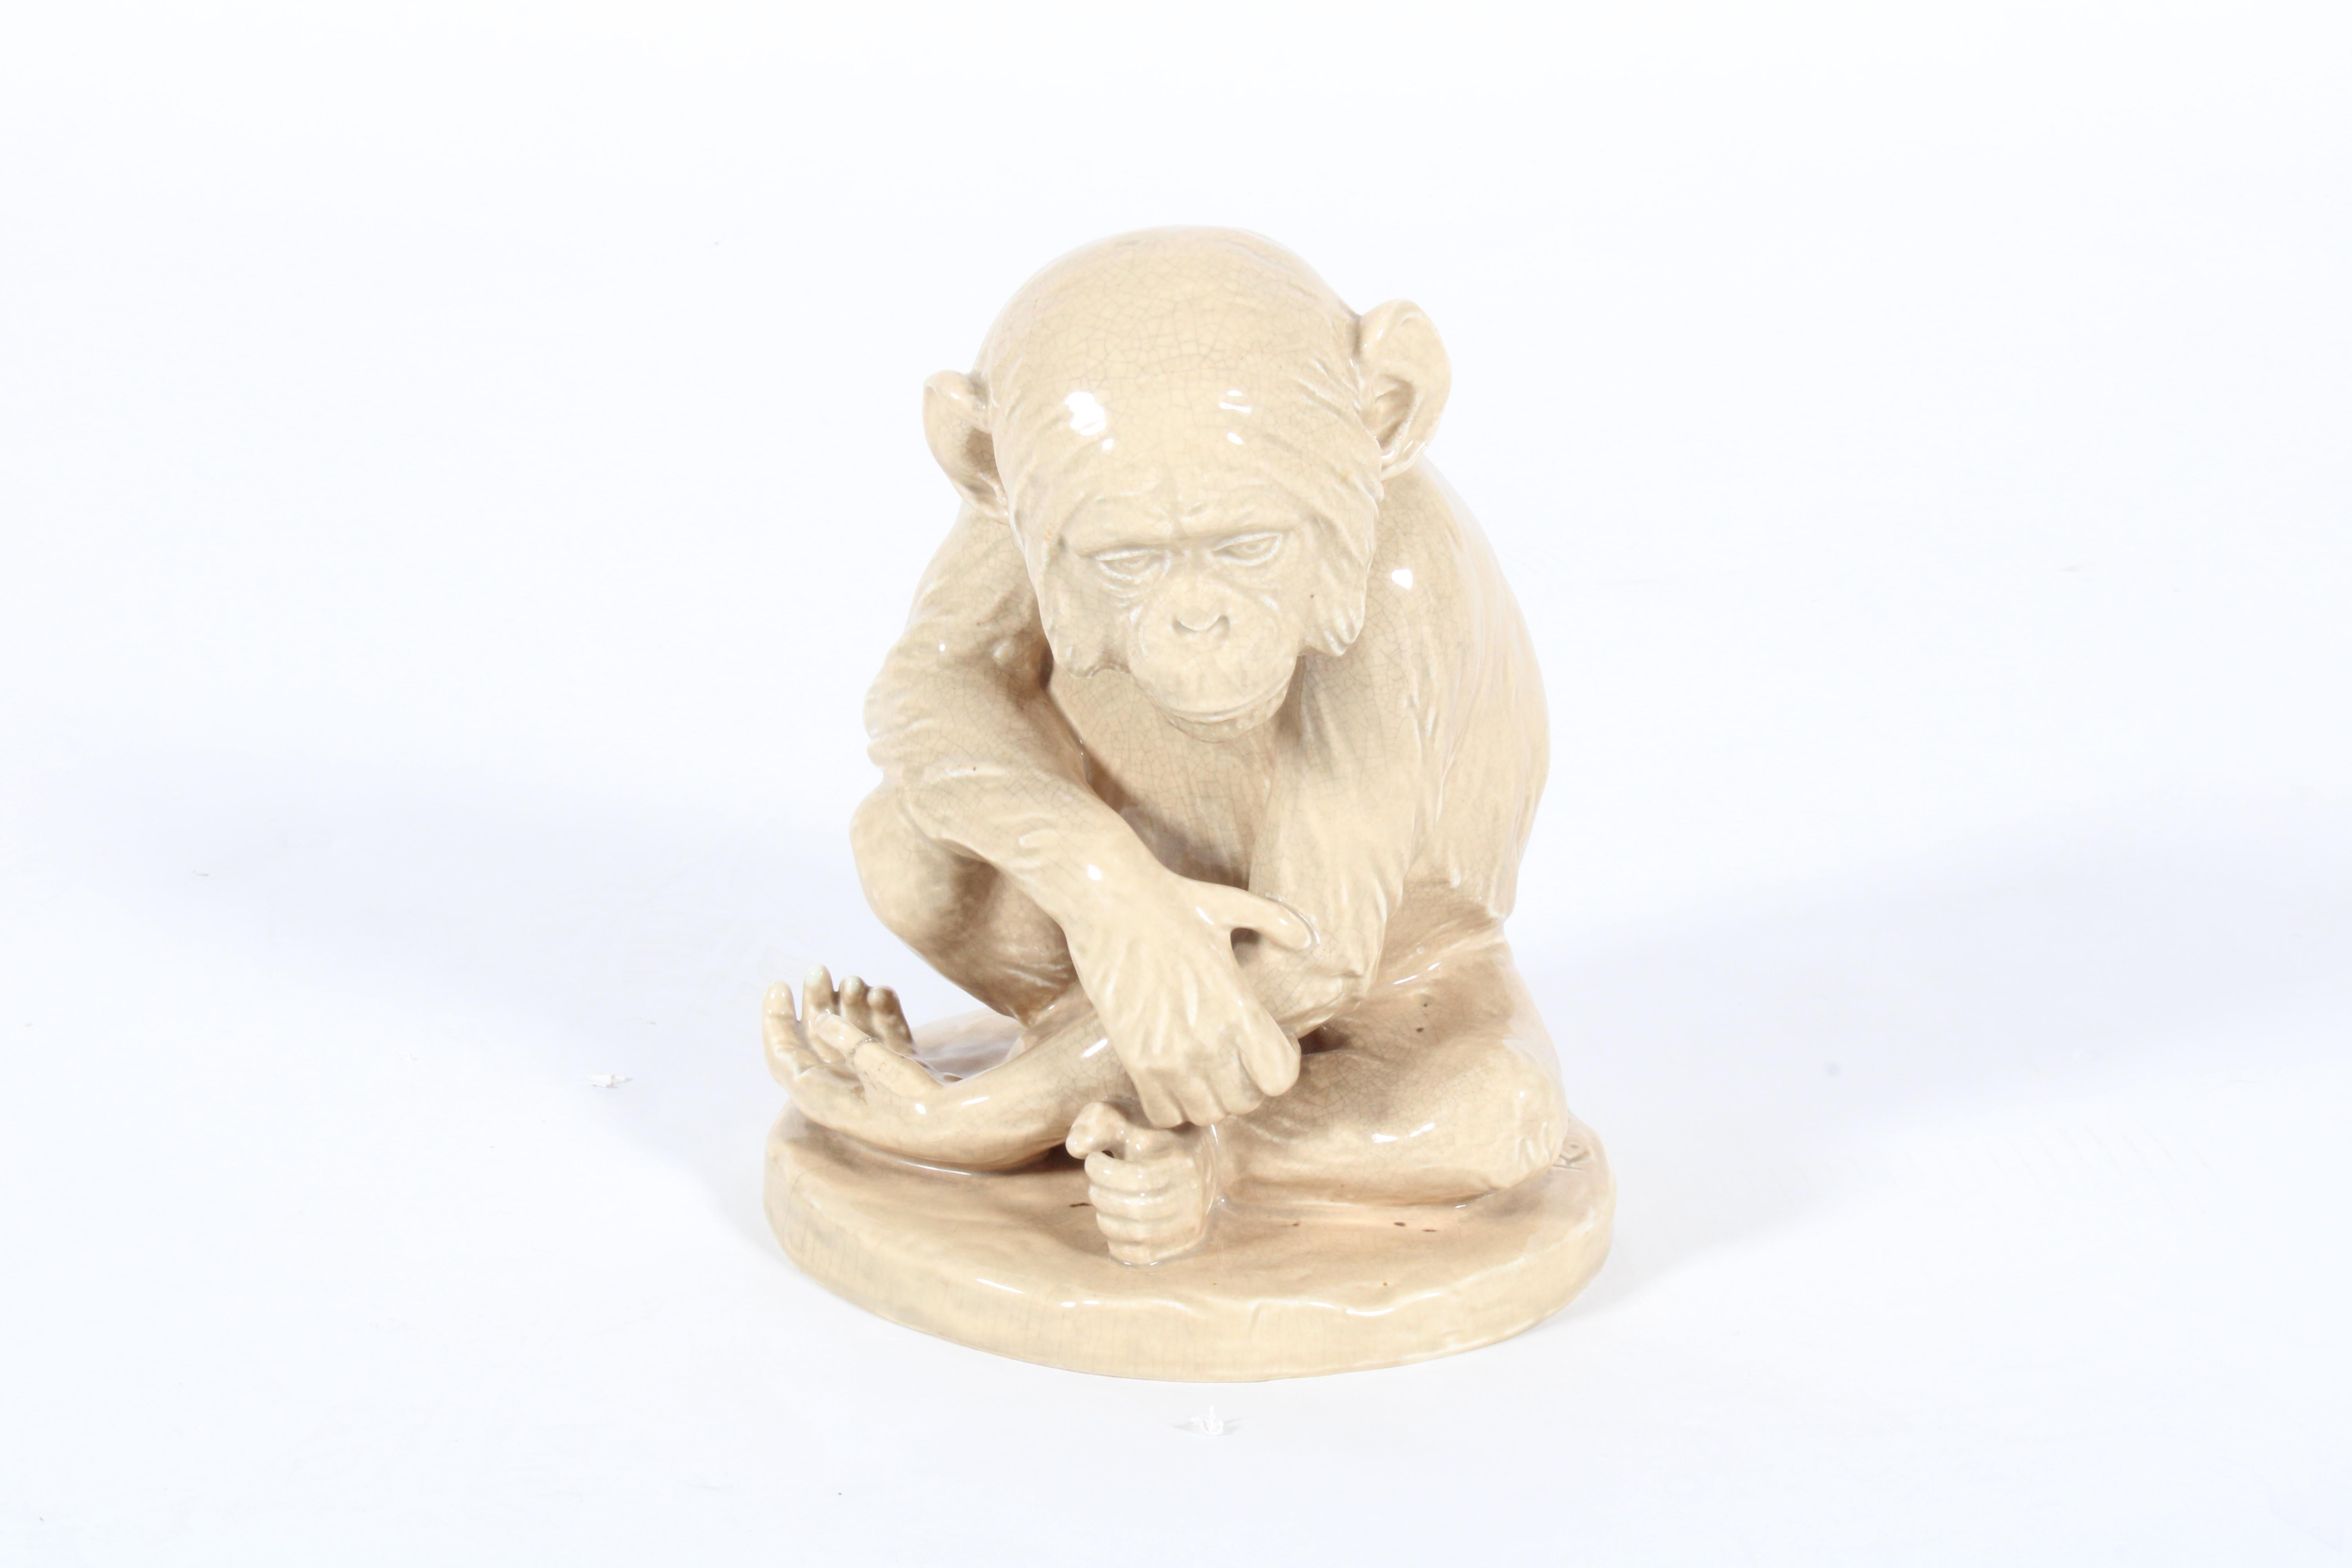 Charming Vintage Ceramic In The Form Of A Chimpanzee  *Free Worldwide Shipping 8